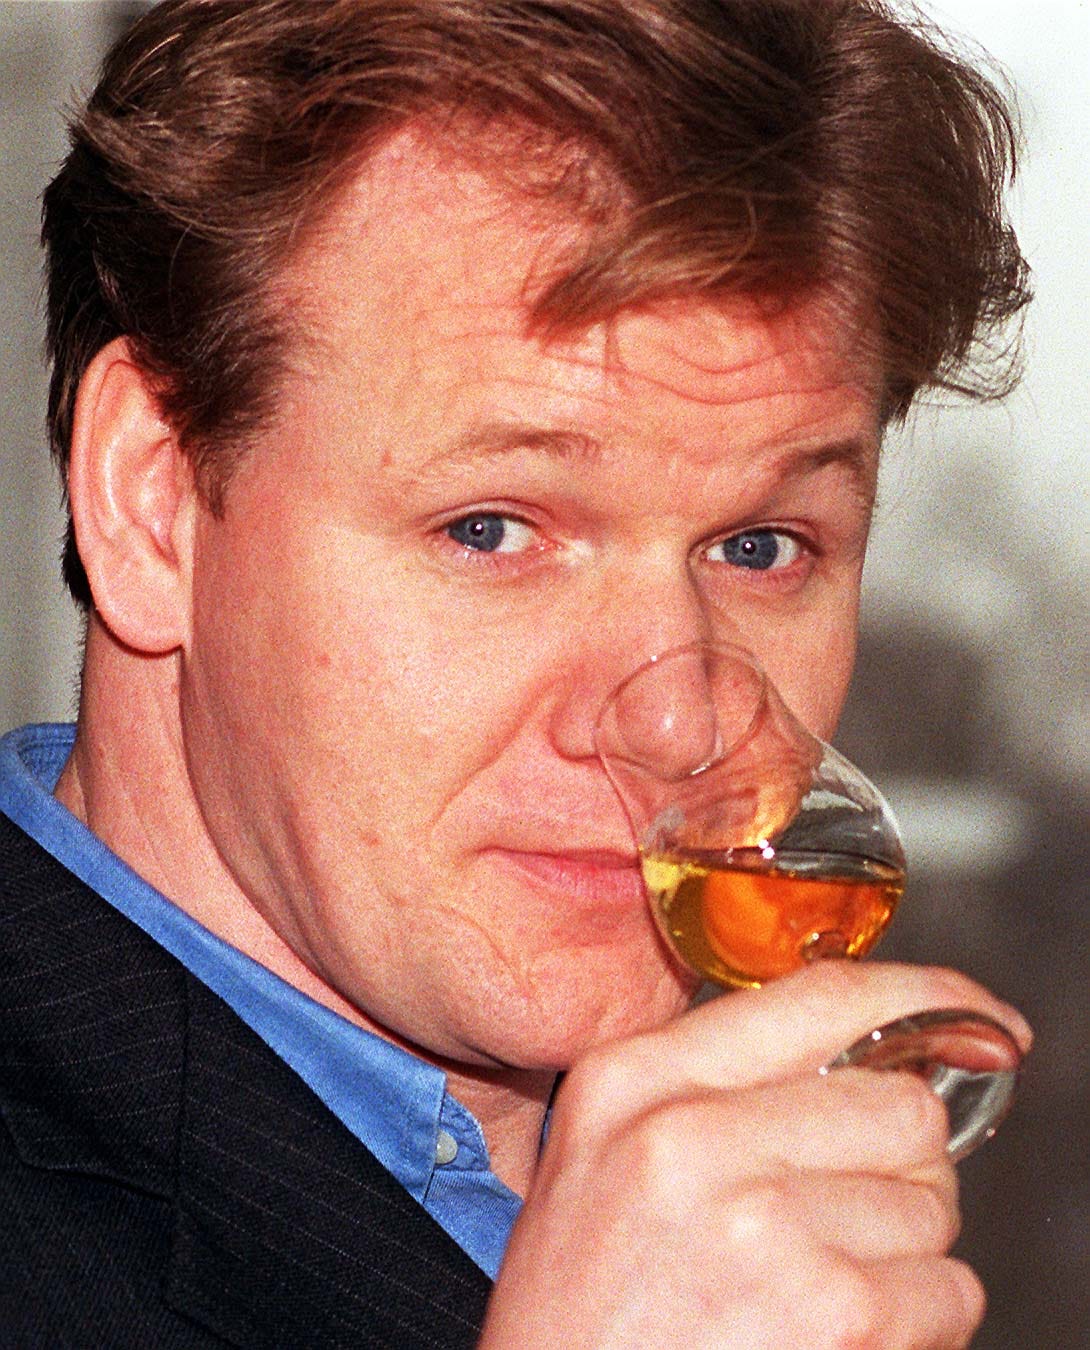 Gordon Ramsay pictured during his early career as a chef in the 1990s.